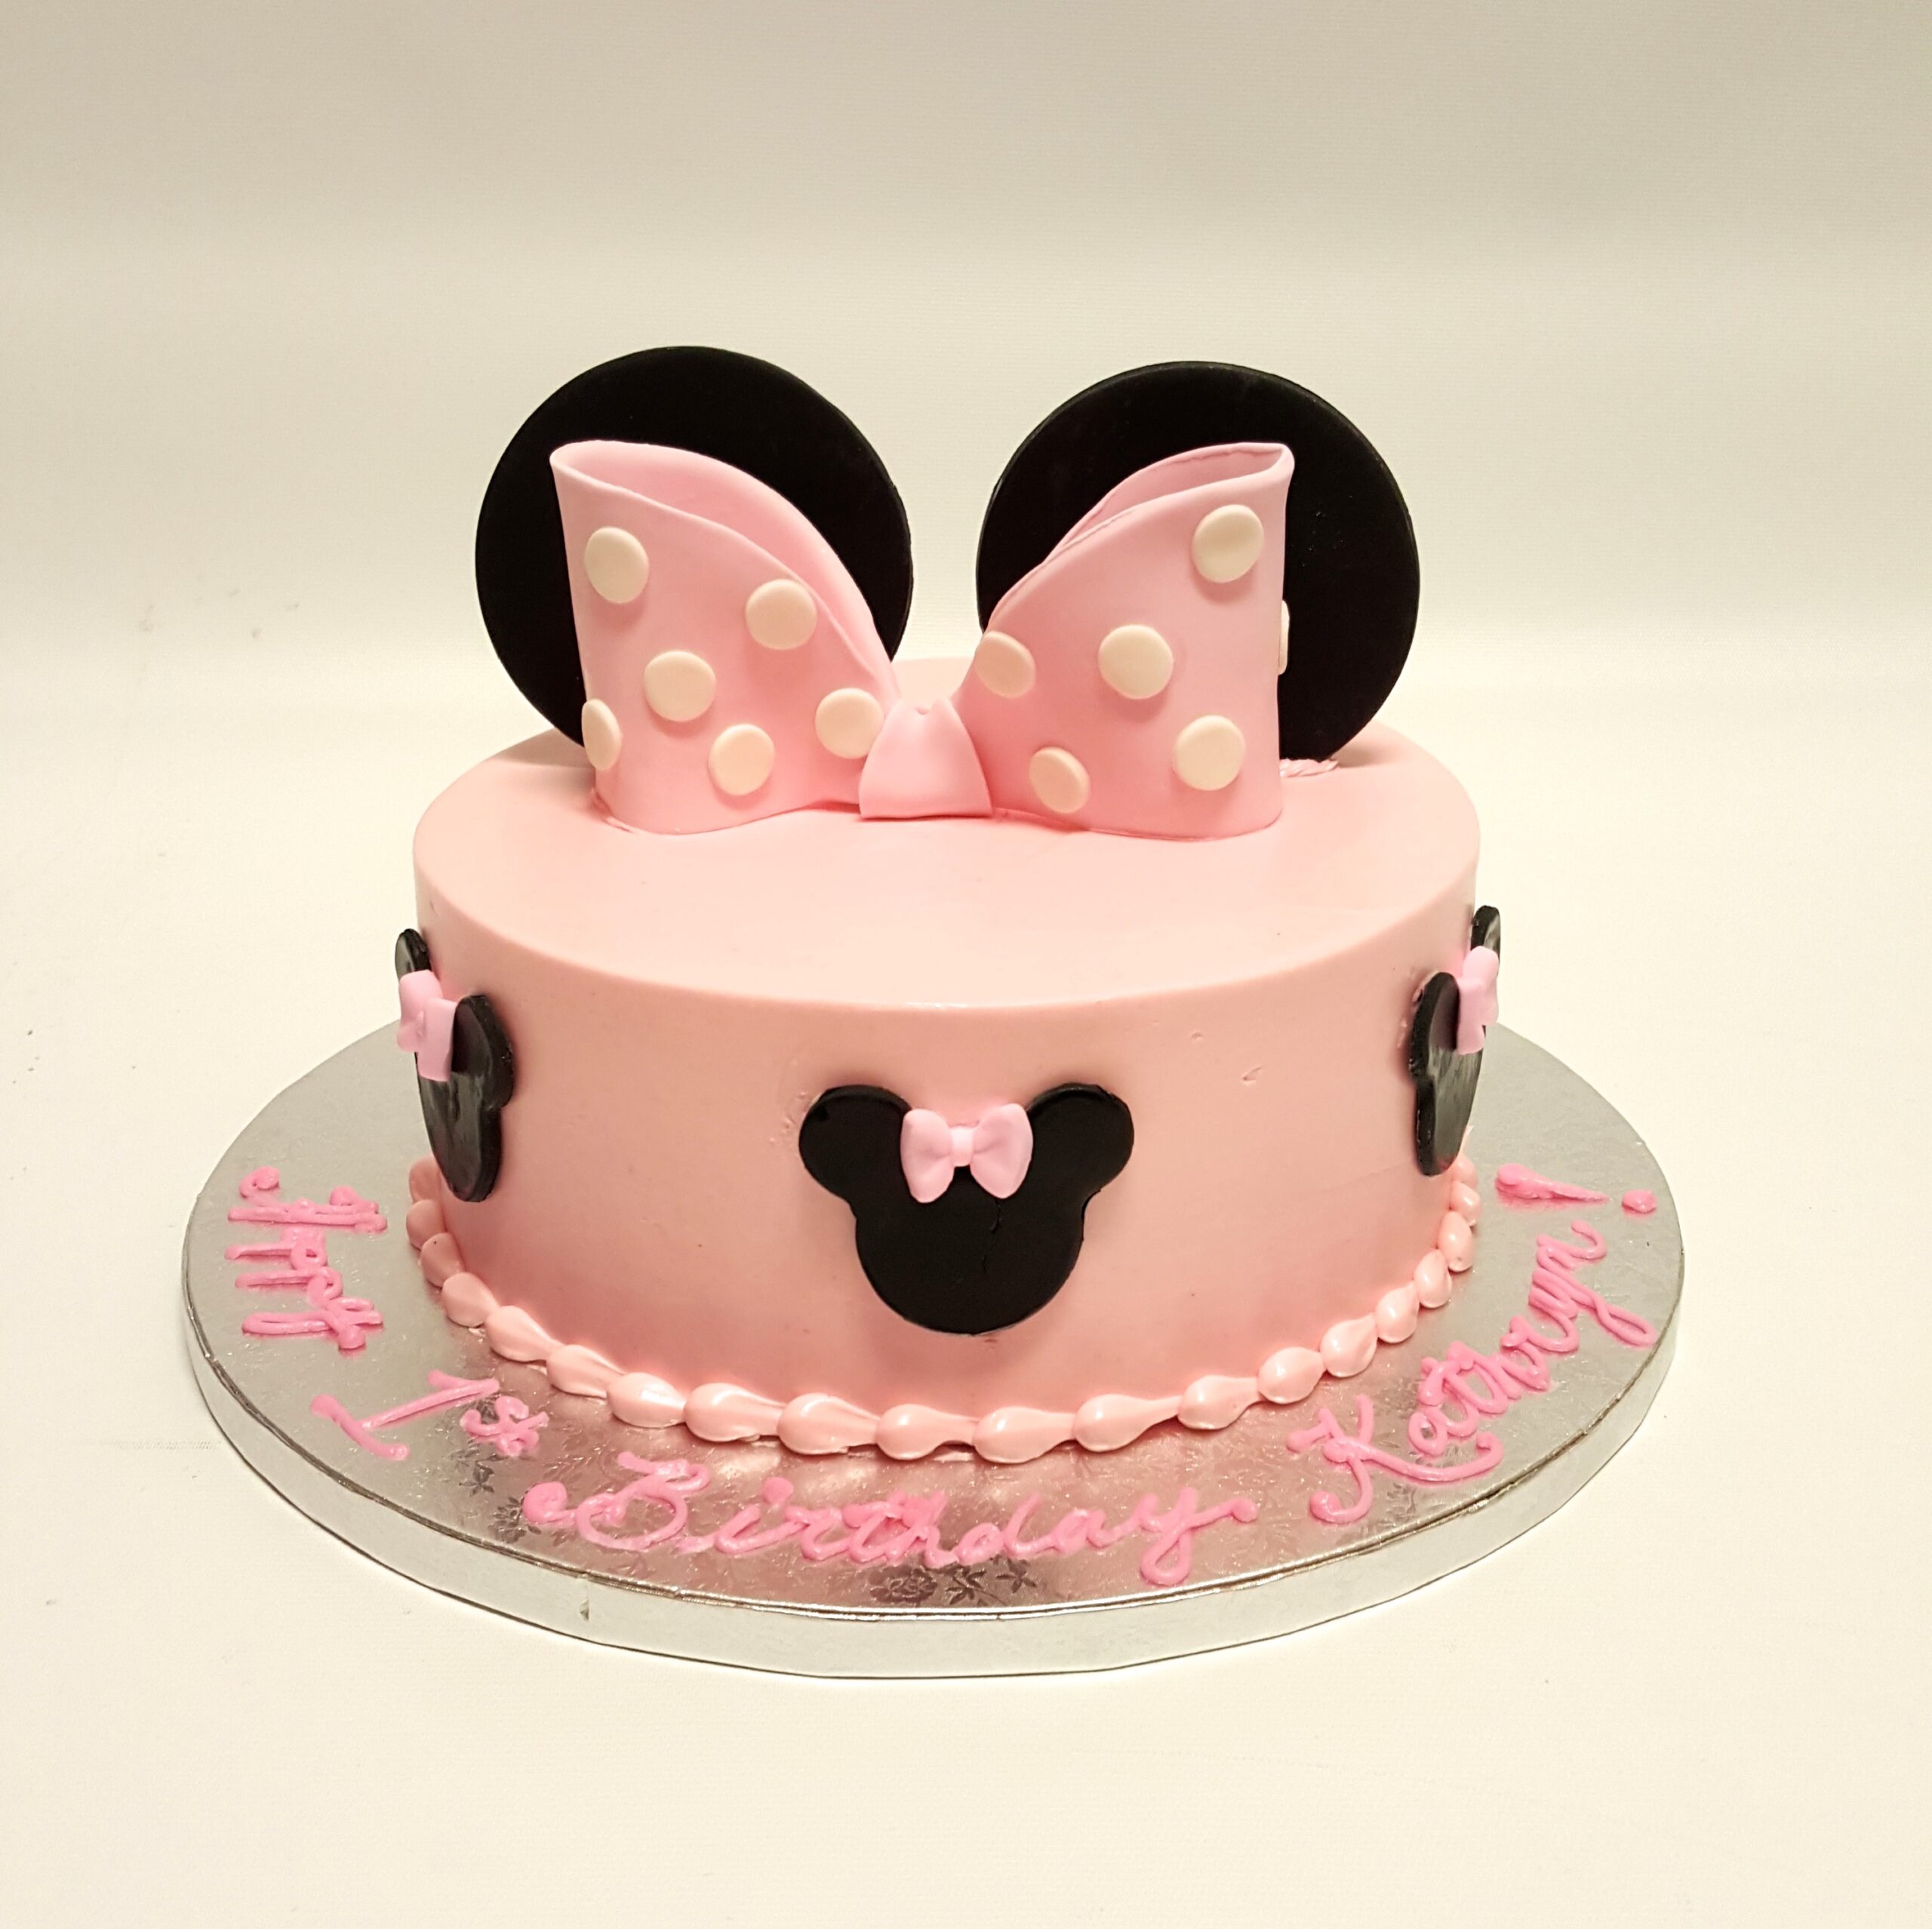 Miss Cupcakes» Blog Archive » 2 tiered Minnie mouse birthday cake